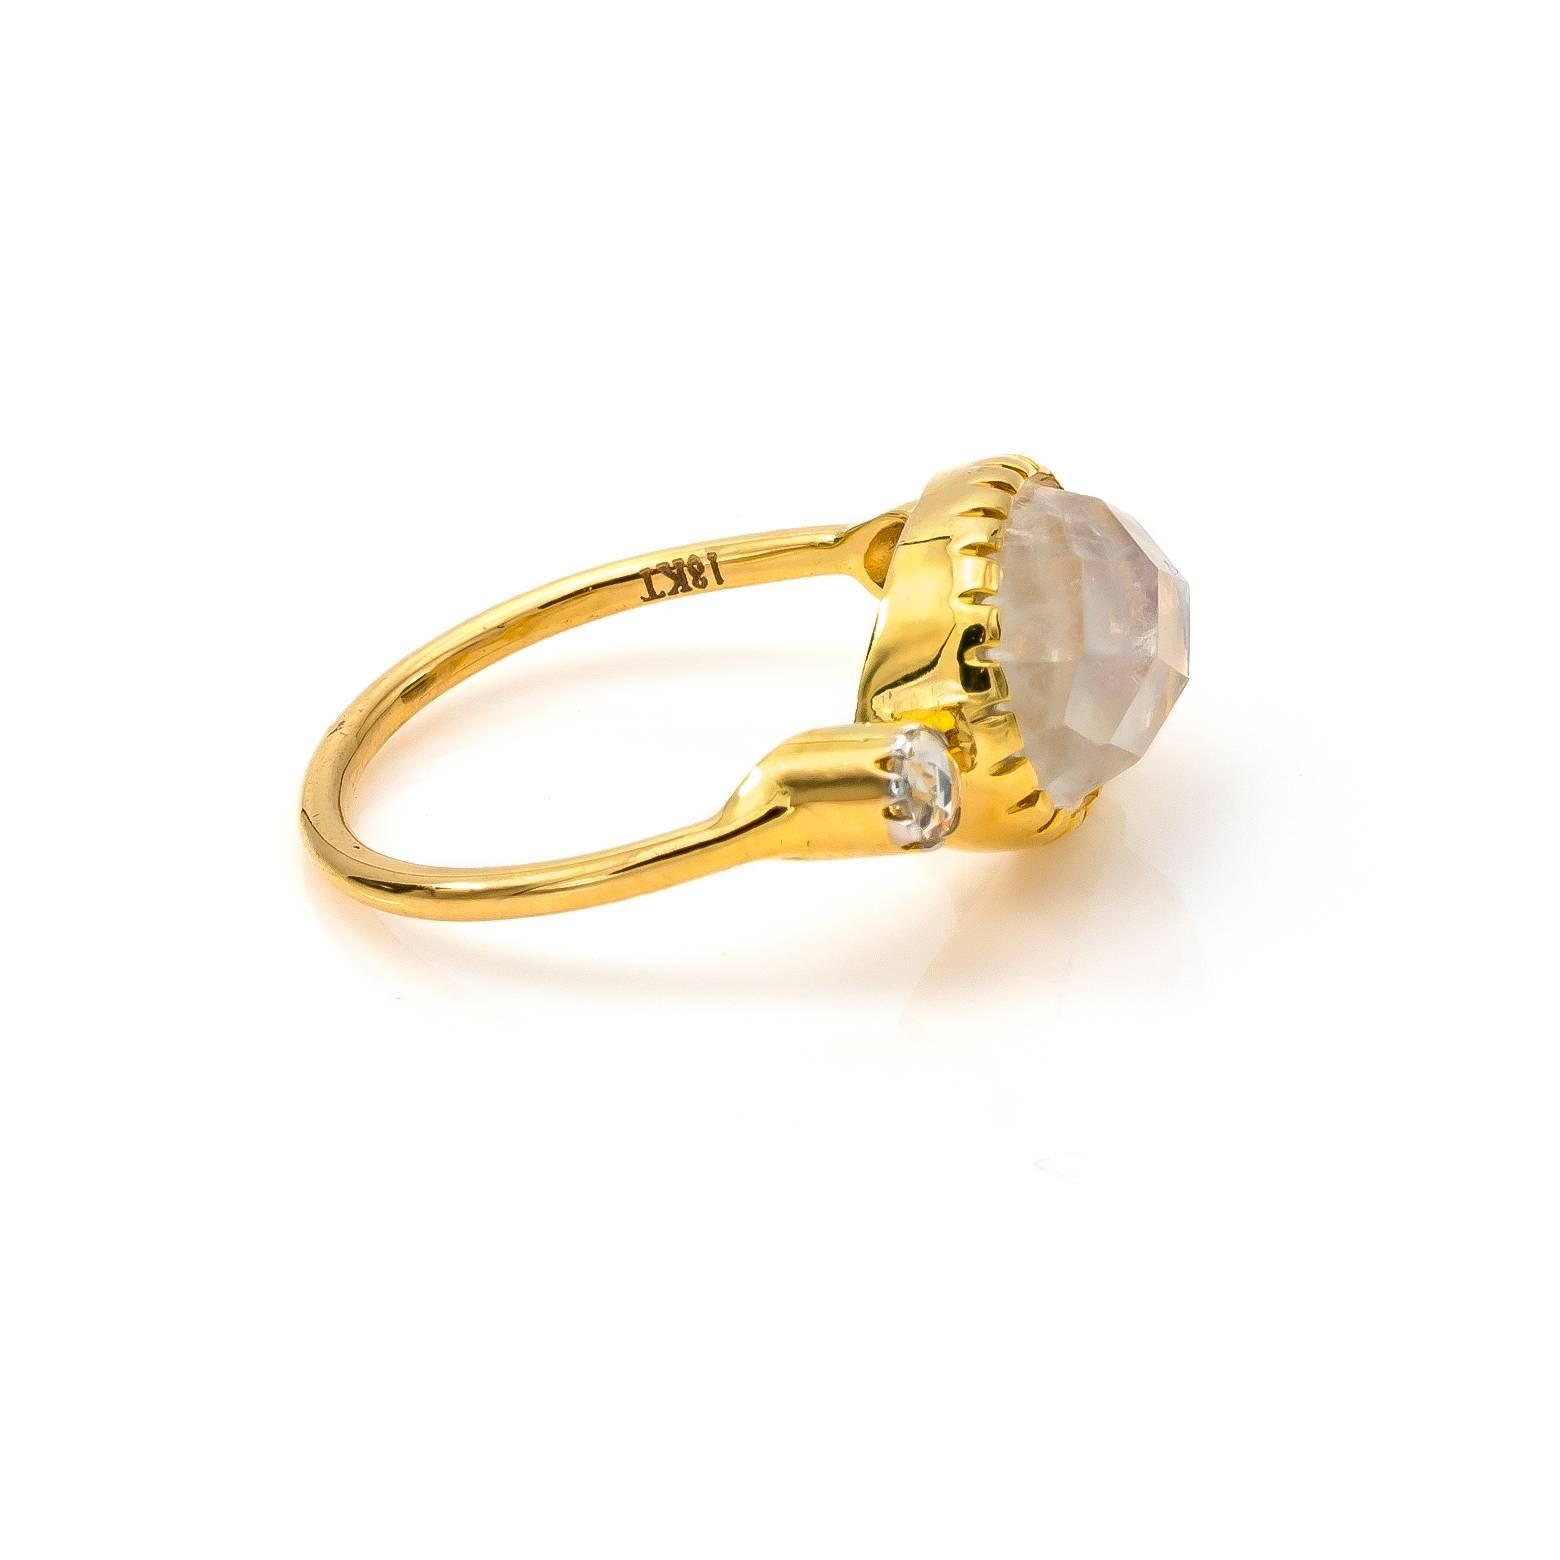 Contemporary Diamond Rose Cut and Faceted Oval Moonstone Ring in 18 Karat Gold